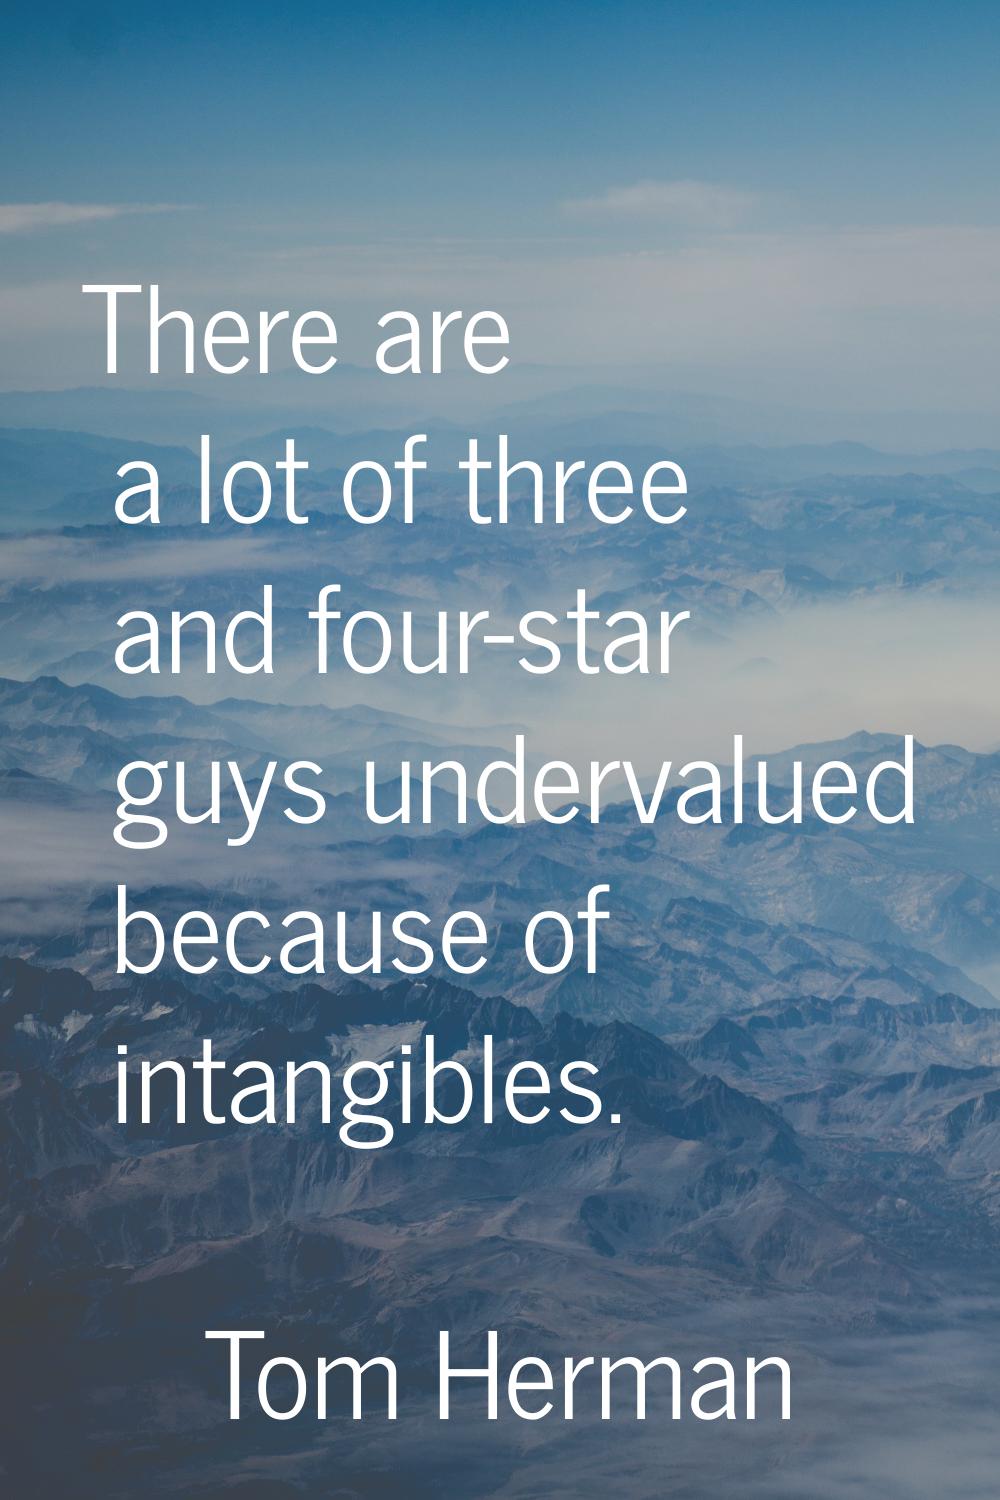 There are a lot of three and four-star guys undervalued because of intangibles.